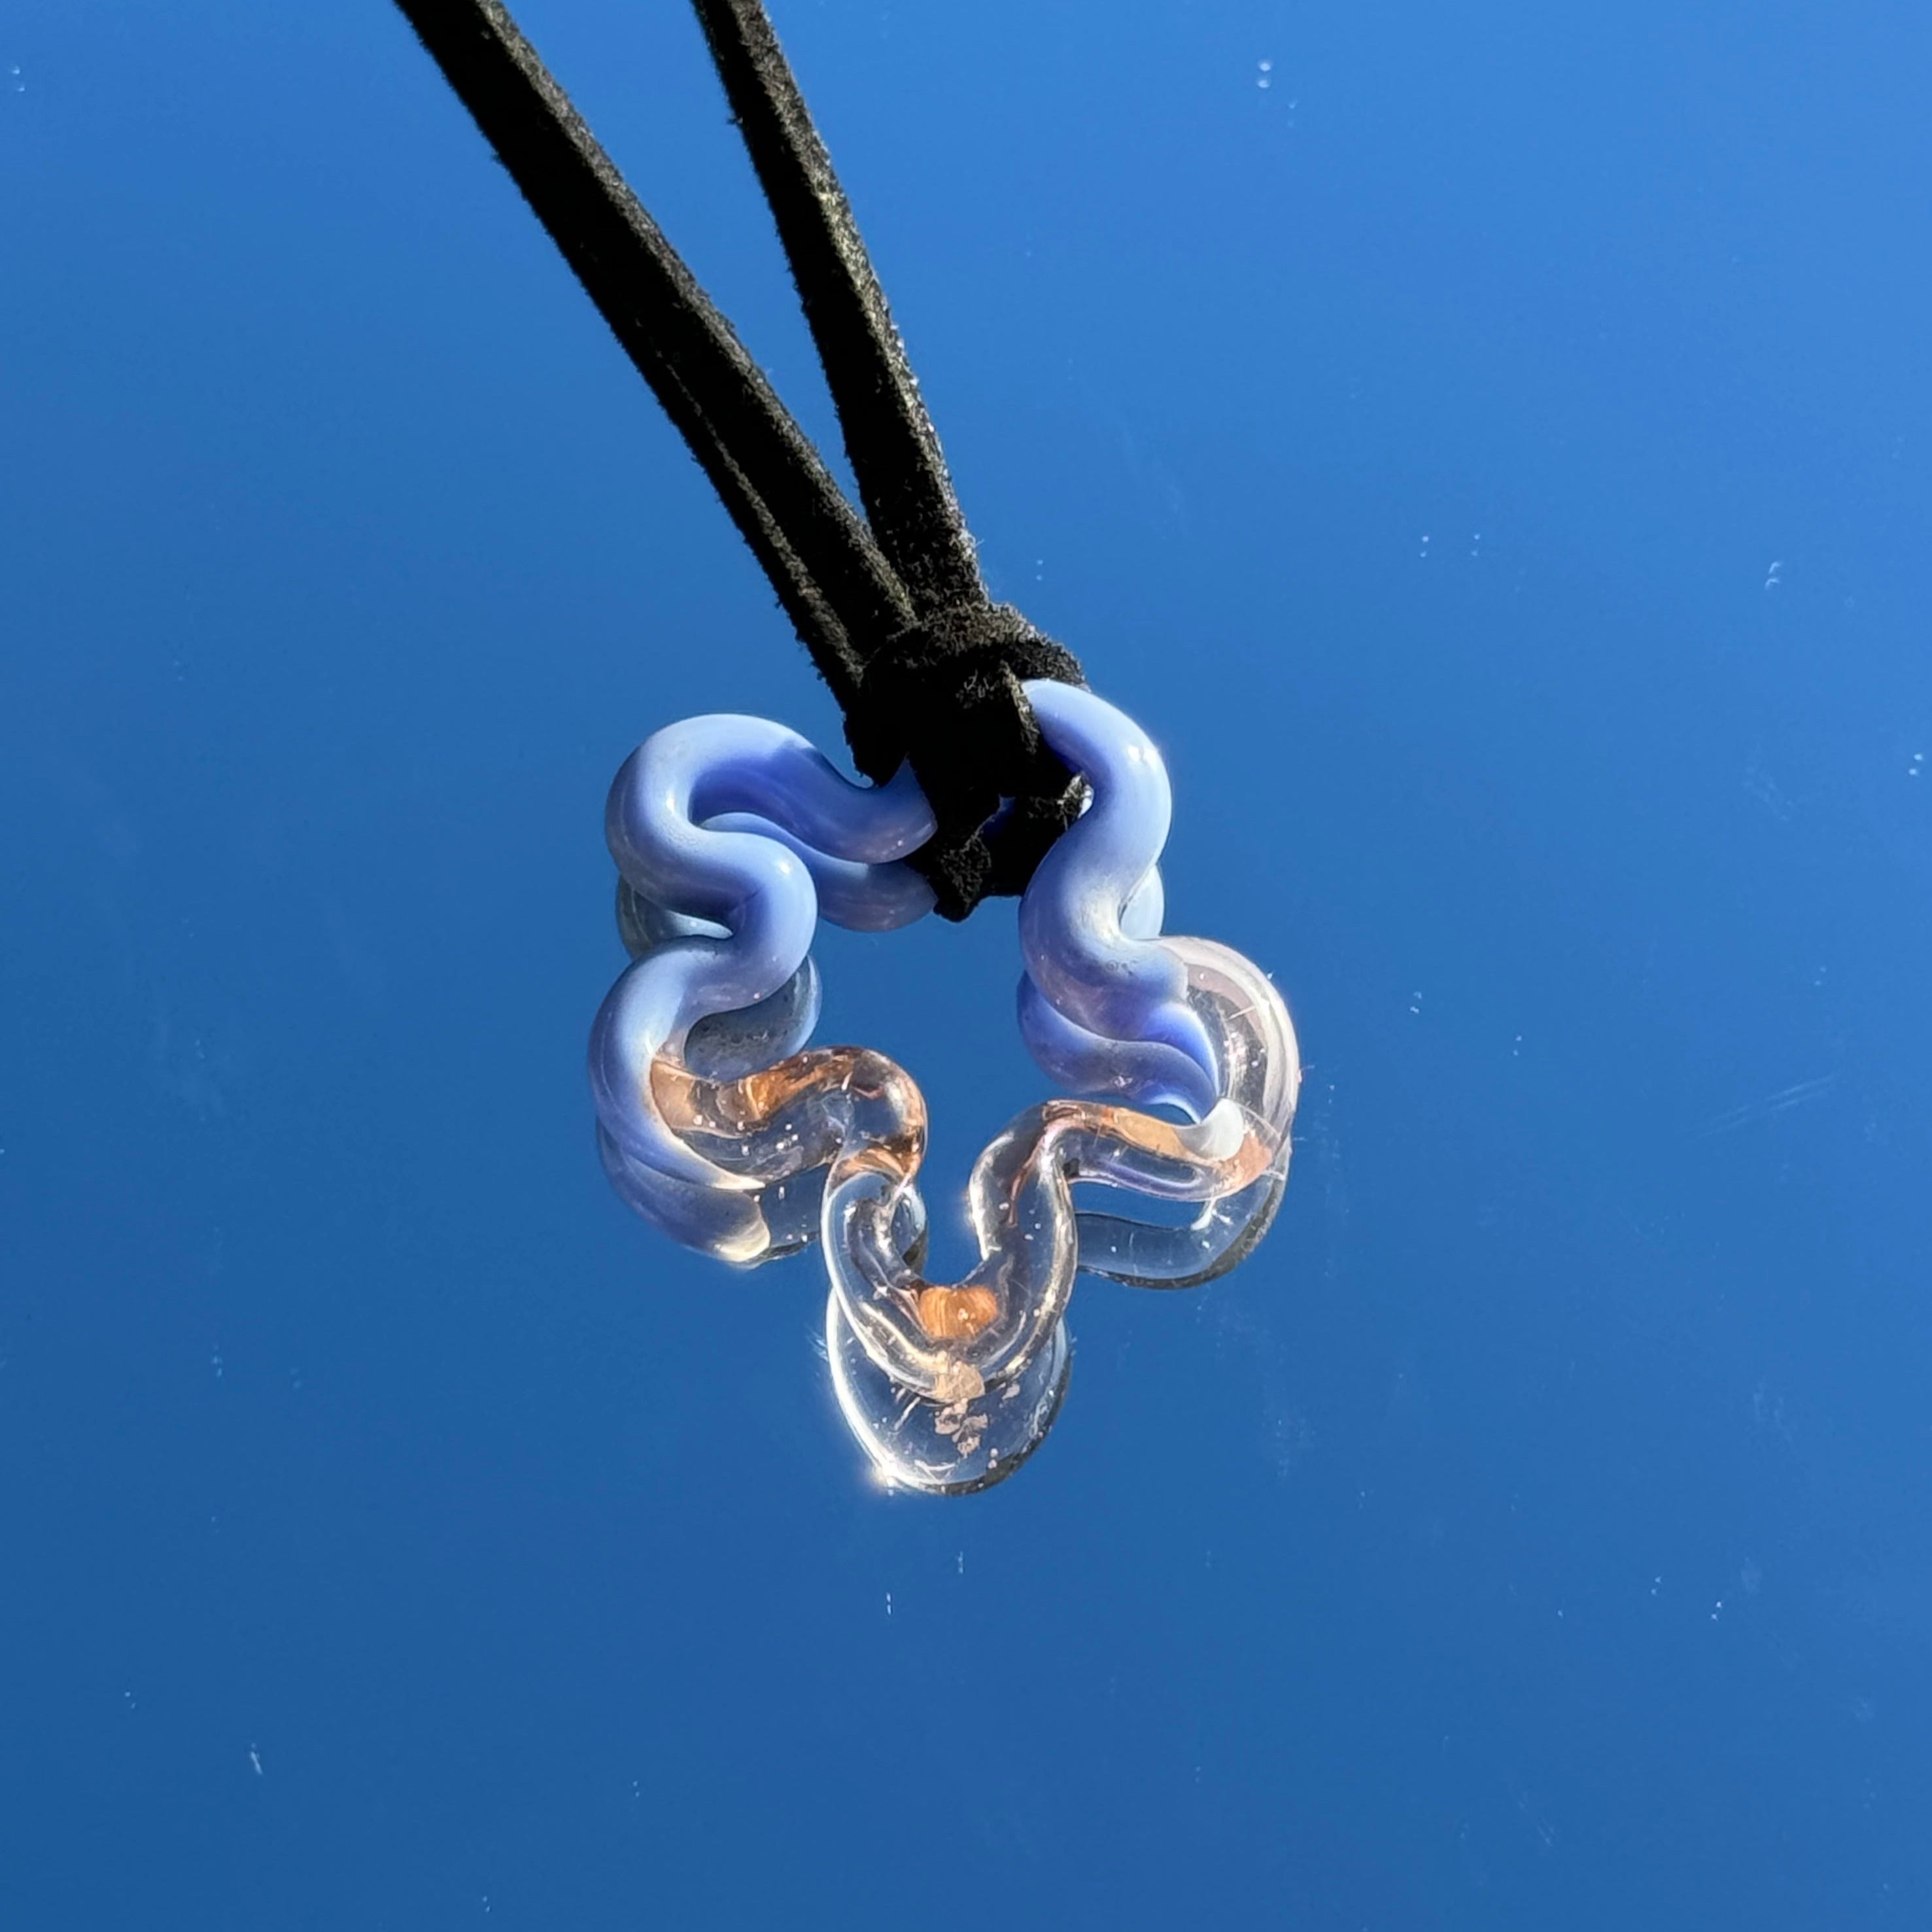 Sweet Thing Murano Glass Squiggle Rope Tie Necklace